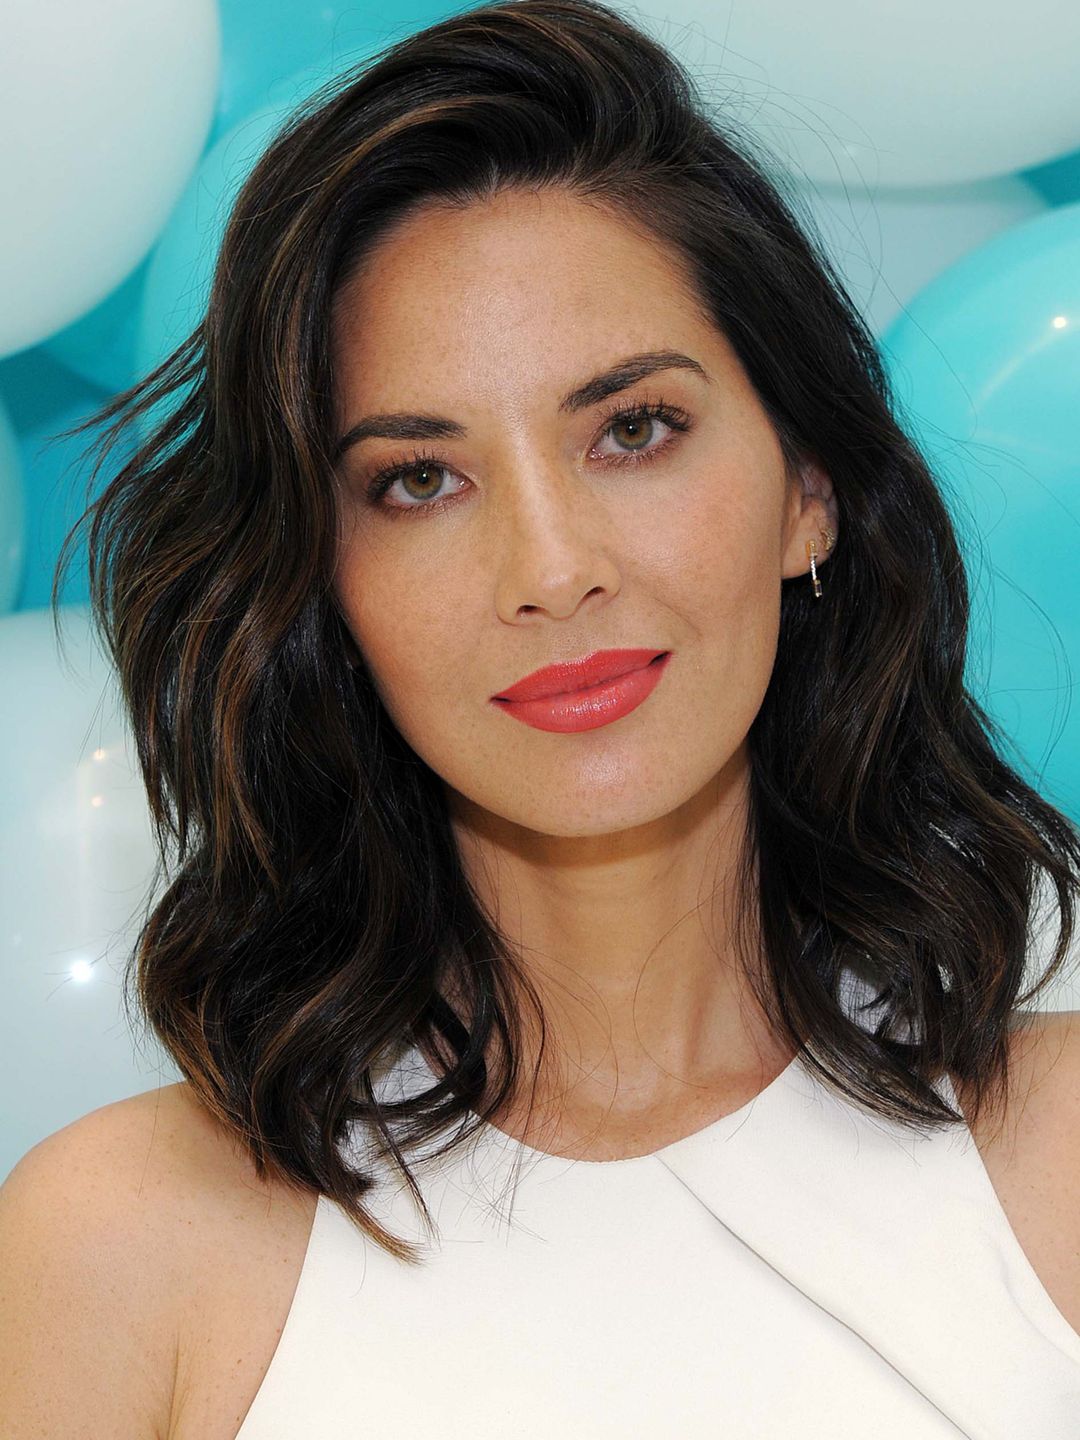 Olivia Munn who is her father